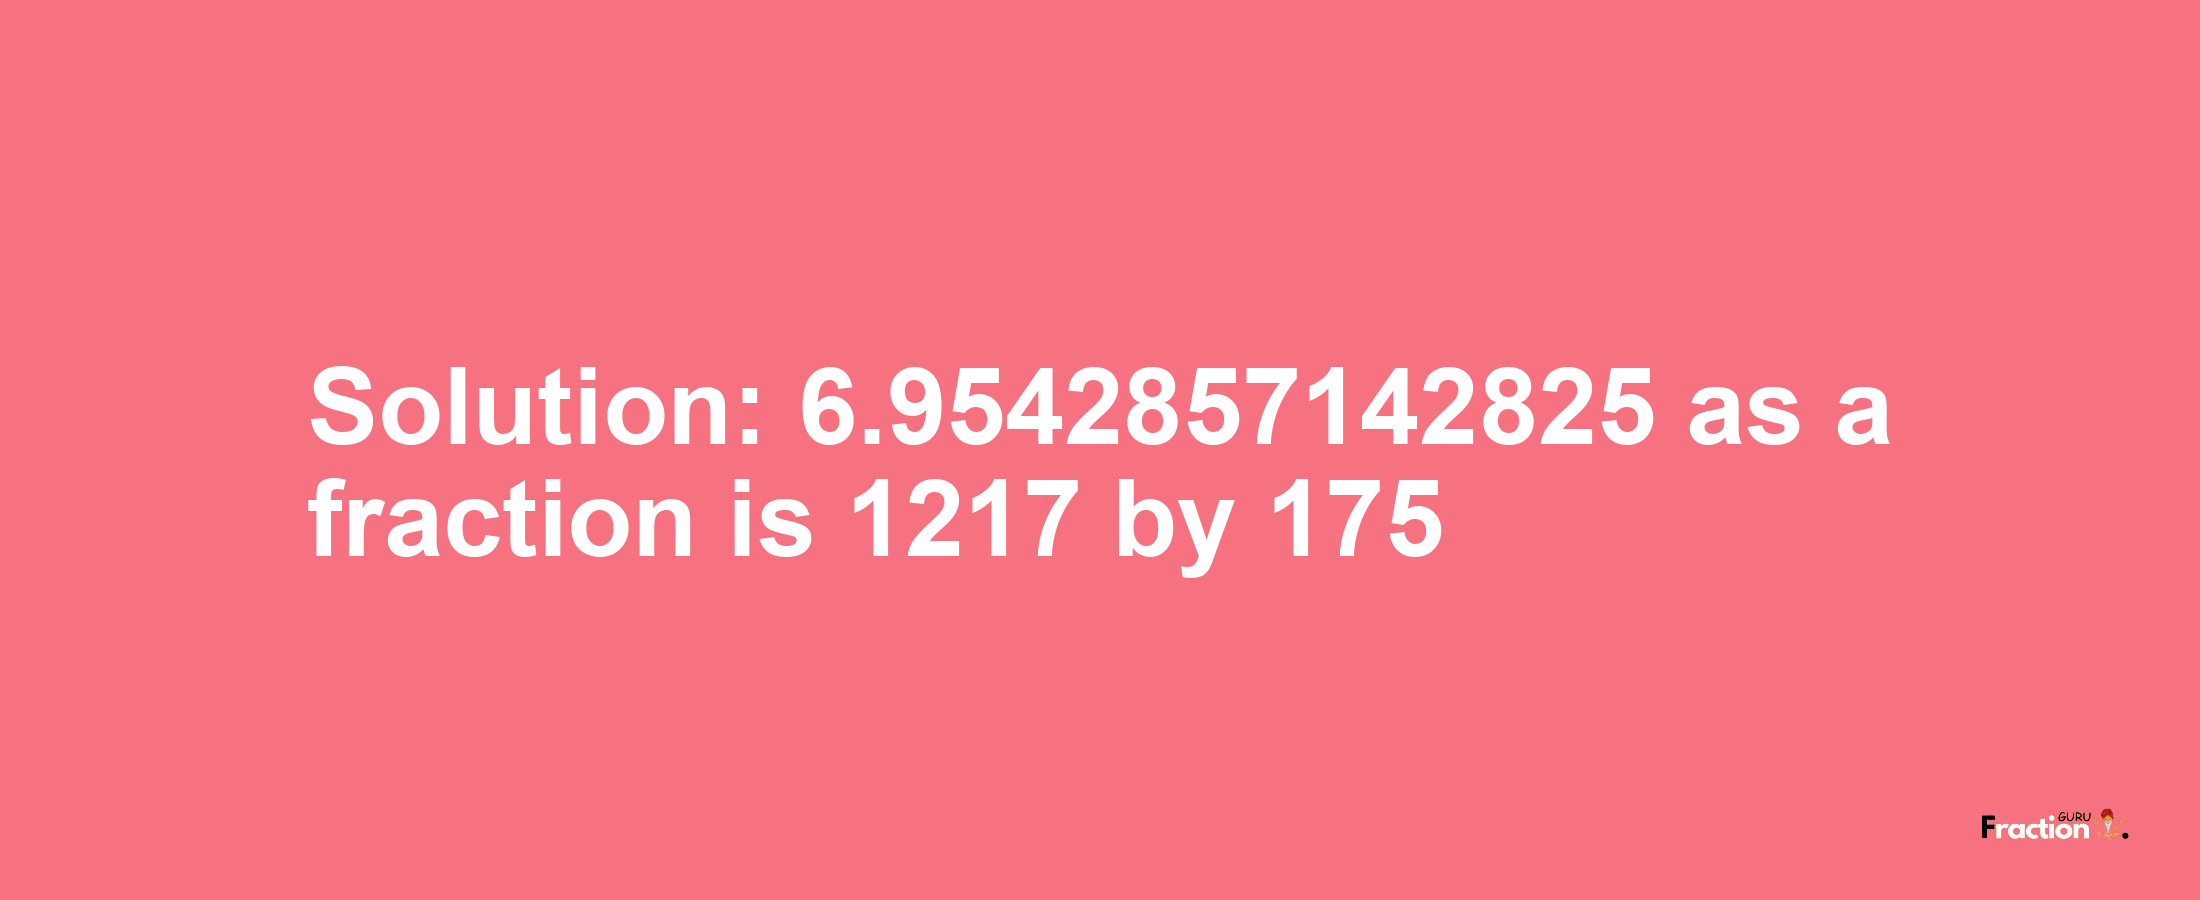 Solution:6.9542857142825 as a fraction is 1217/175